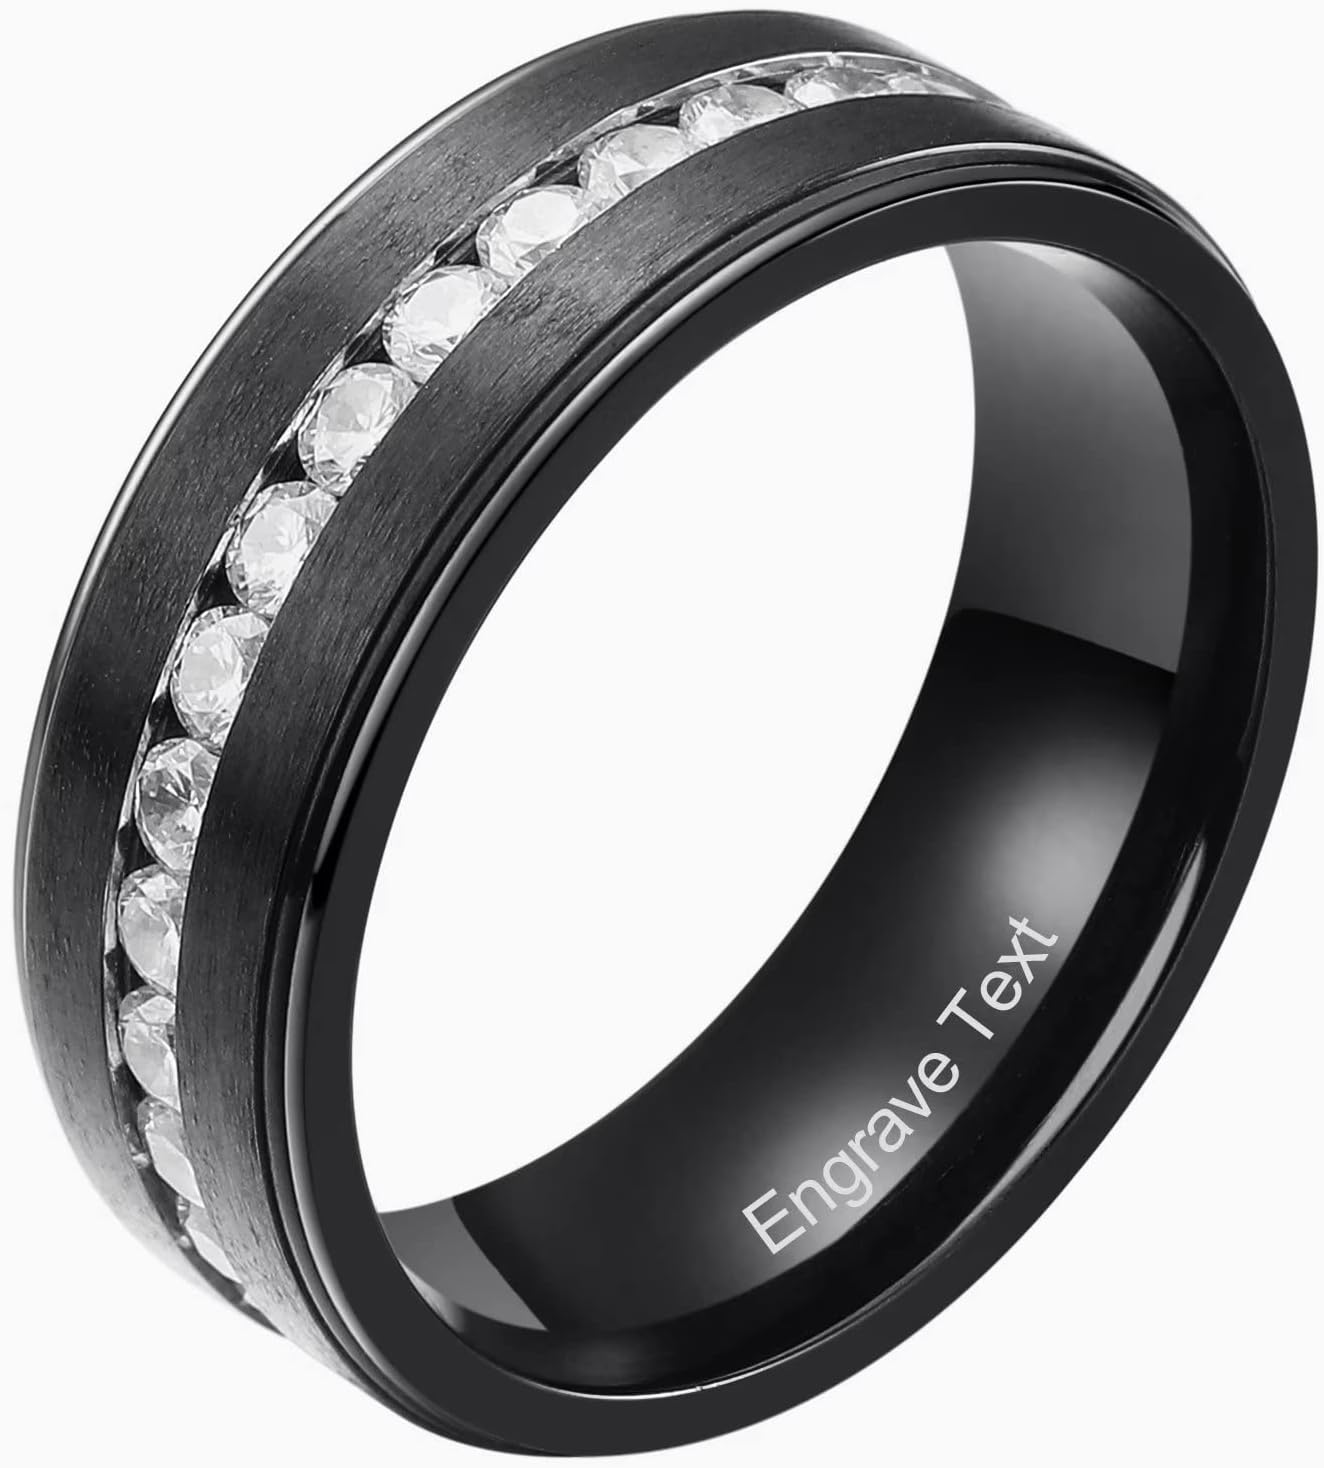 King Will GEM Custom Engraving Mens 8mm Tungsten Carbide Ring Cubic Zircon Stones Engagement Wedding Promise Band for Women Men Personalized